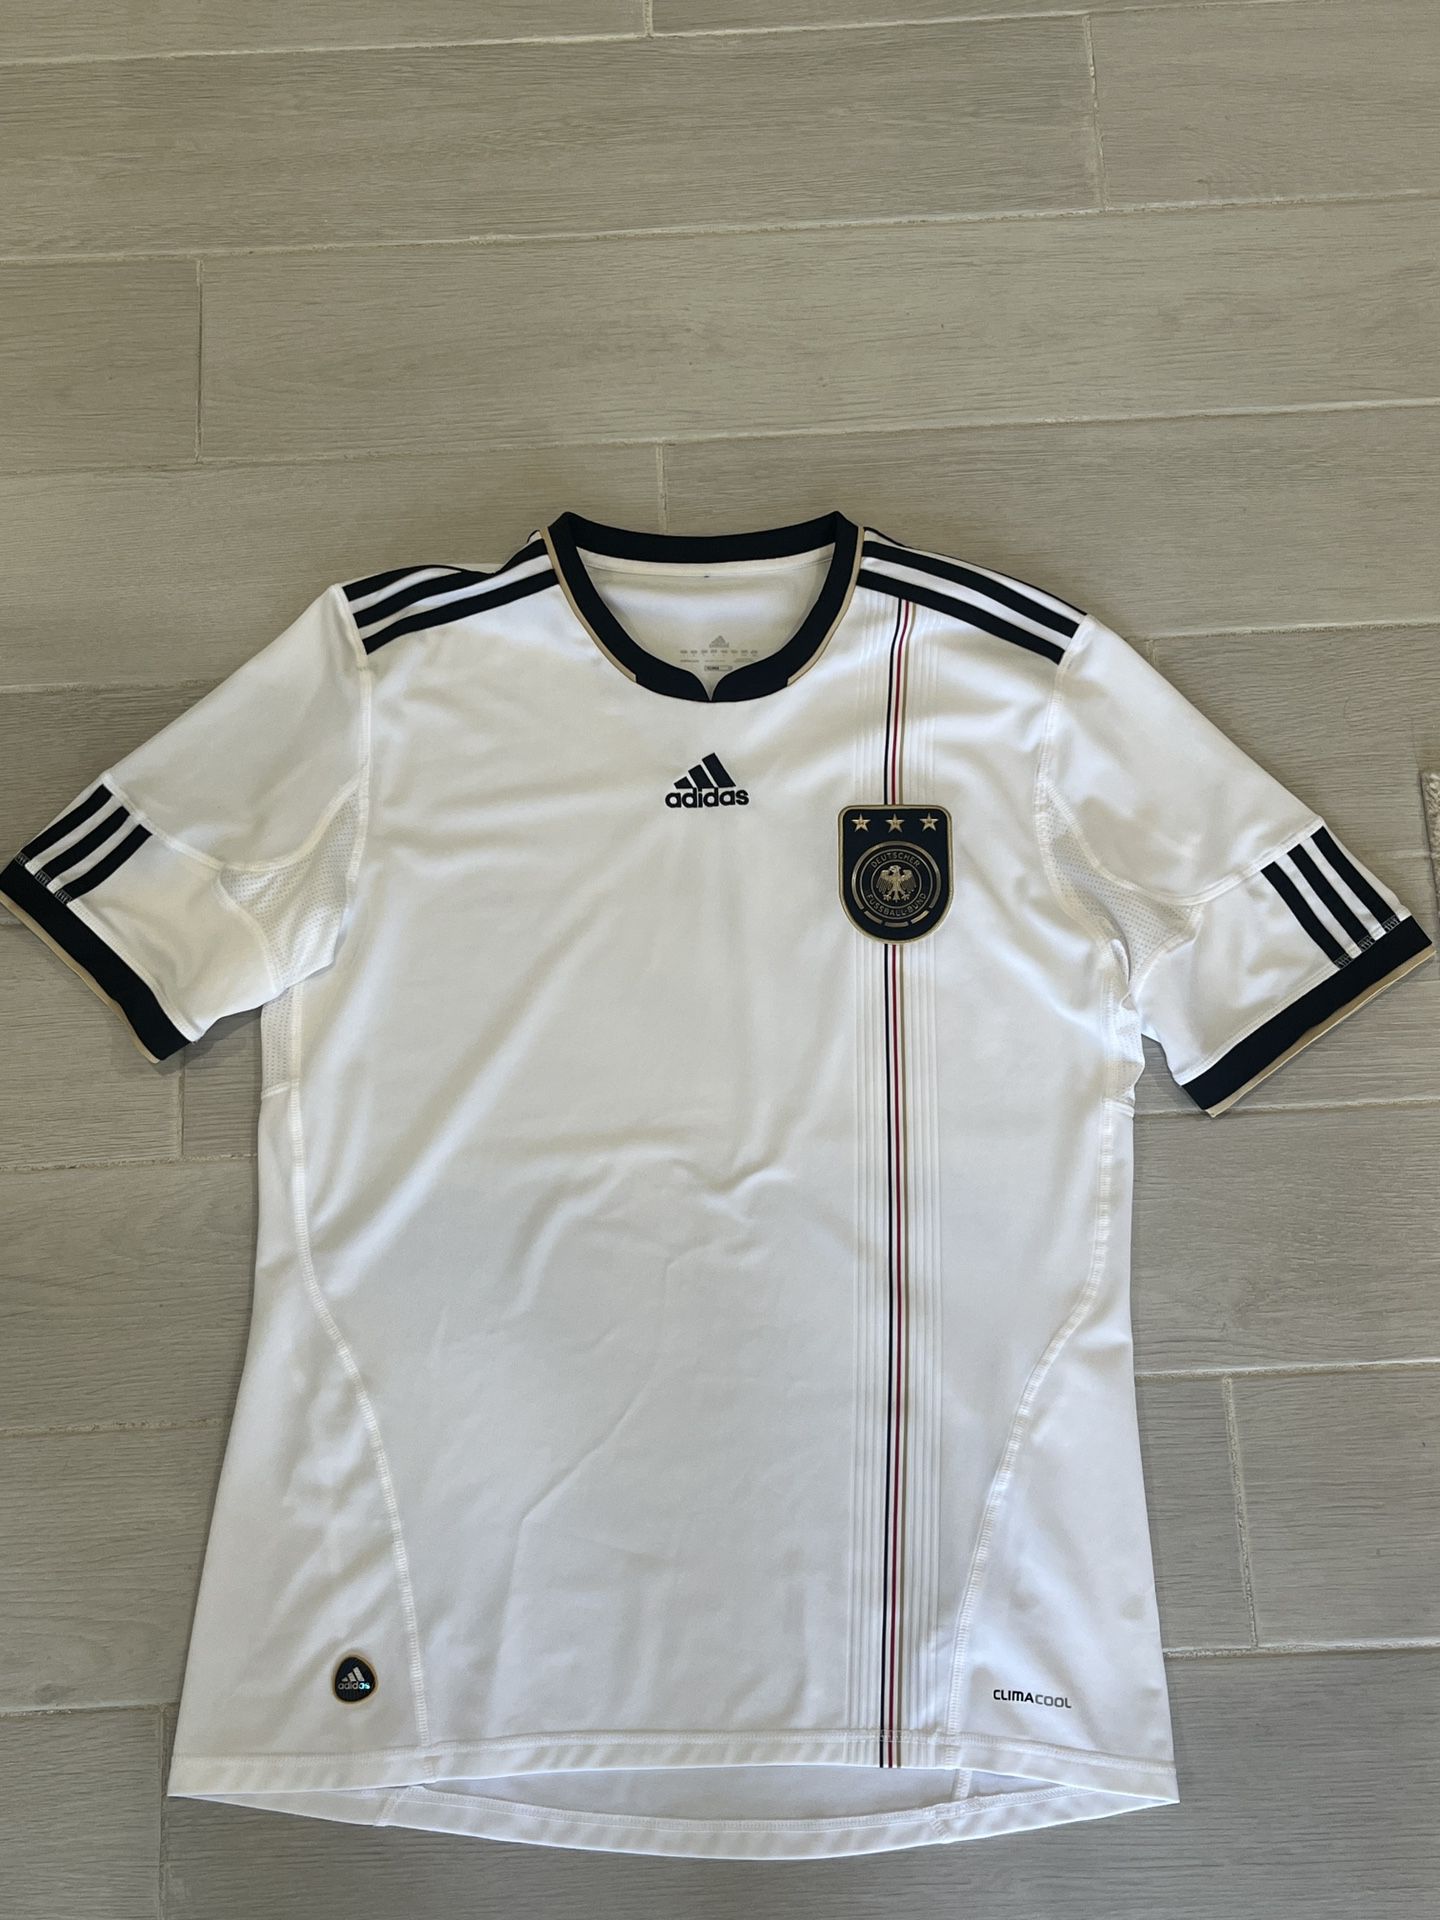 GERMANY ADIDAS 2010 WORLD CUP FOOTBALL HOME JERSEY SIZE L P41477 SOCCER